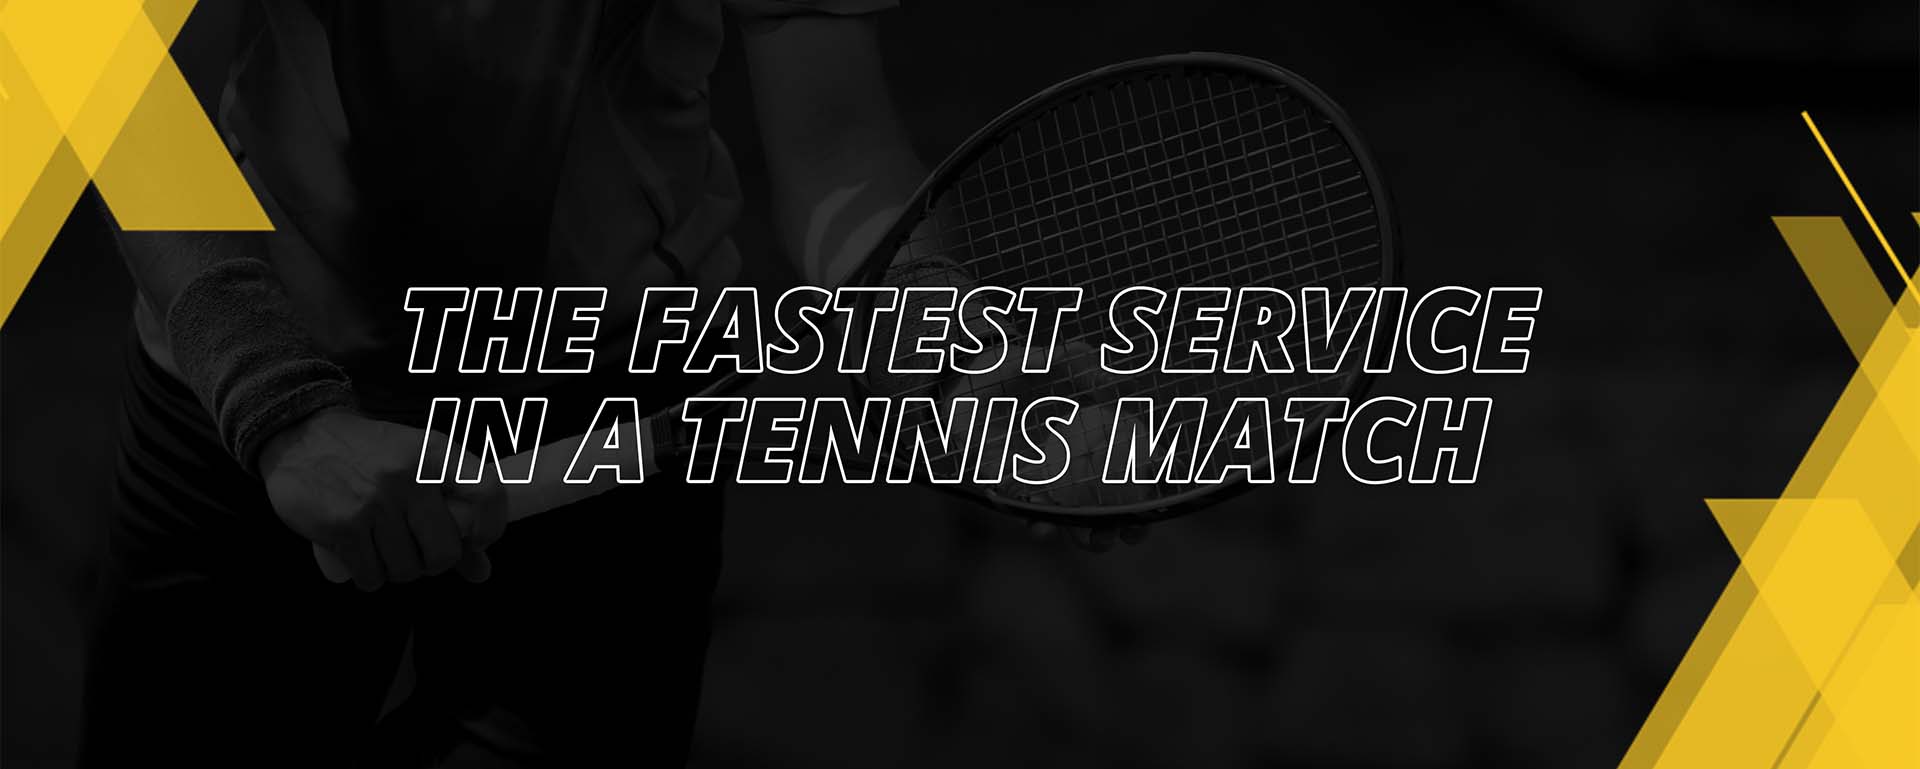 THE FASTASTIC SERVICE IN A TENNIS MATCH